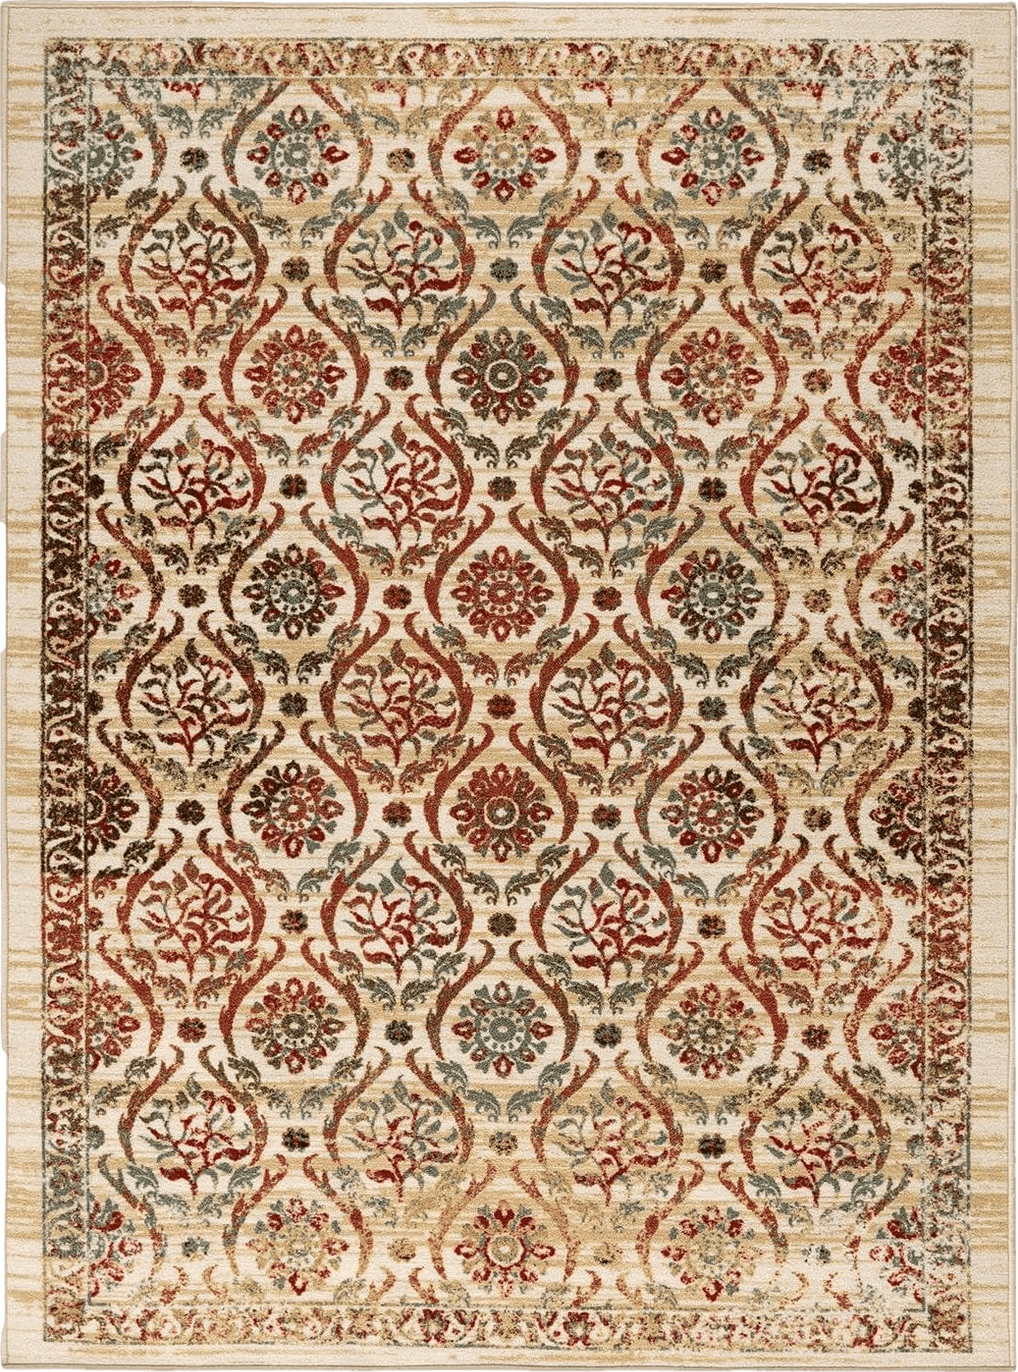 Christmas 5x8 Antep Rugs Alfombras Non-Skid (Non-Slip) 5x7 Rubber Backing Floral Geometric Low Profile Pile Indoor Area Rugs (Beige Multi, 5' x 7')